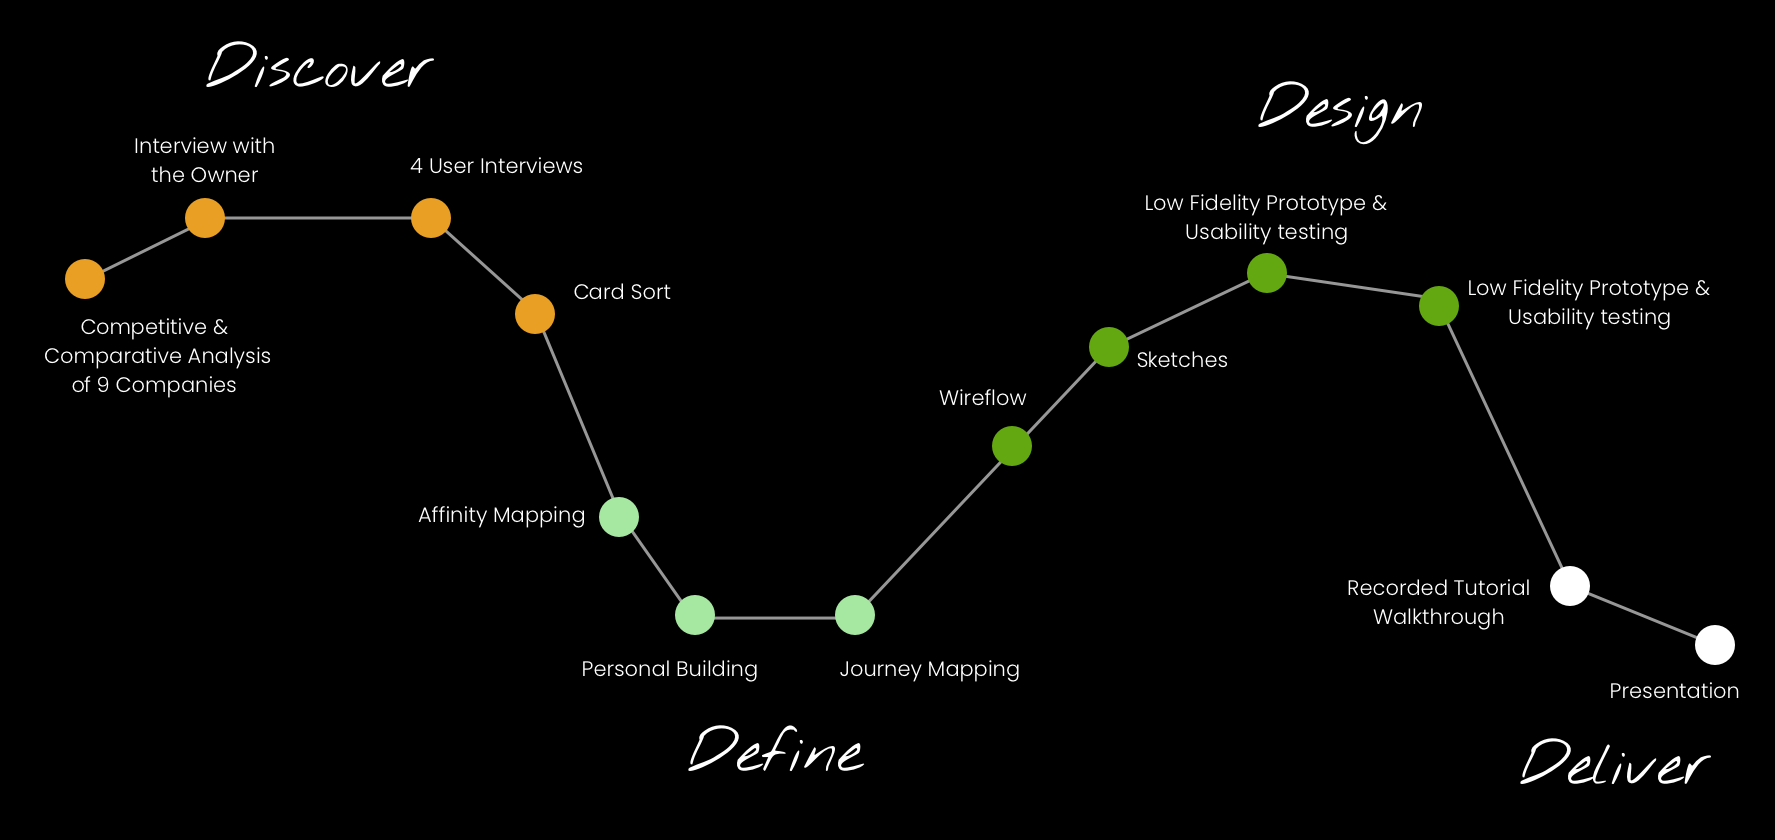 Process-Path showing all of the steps taken from discovering, defining, designing, and delivering the project